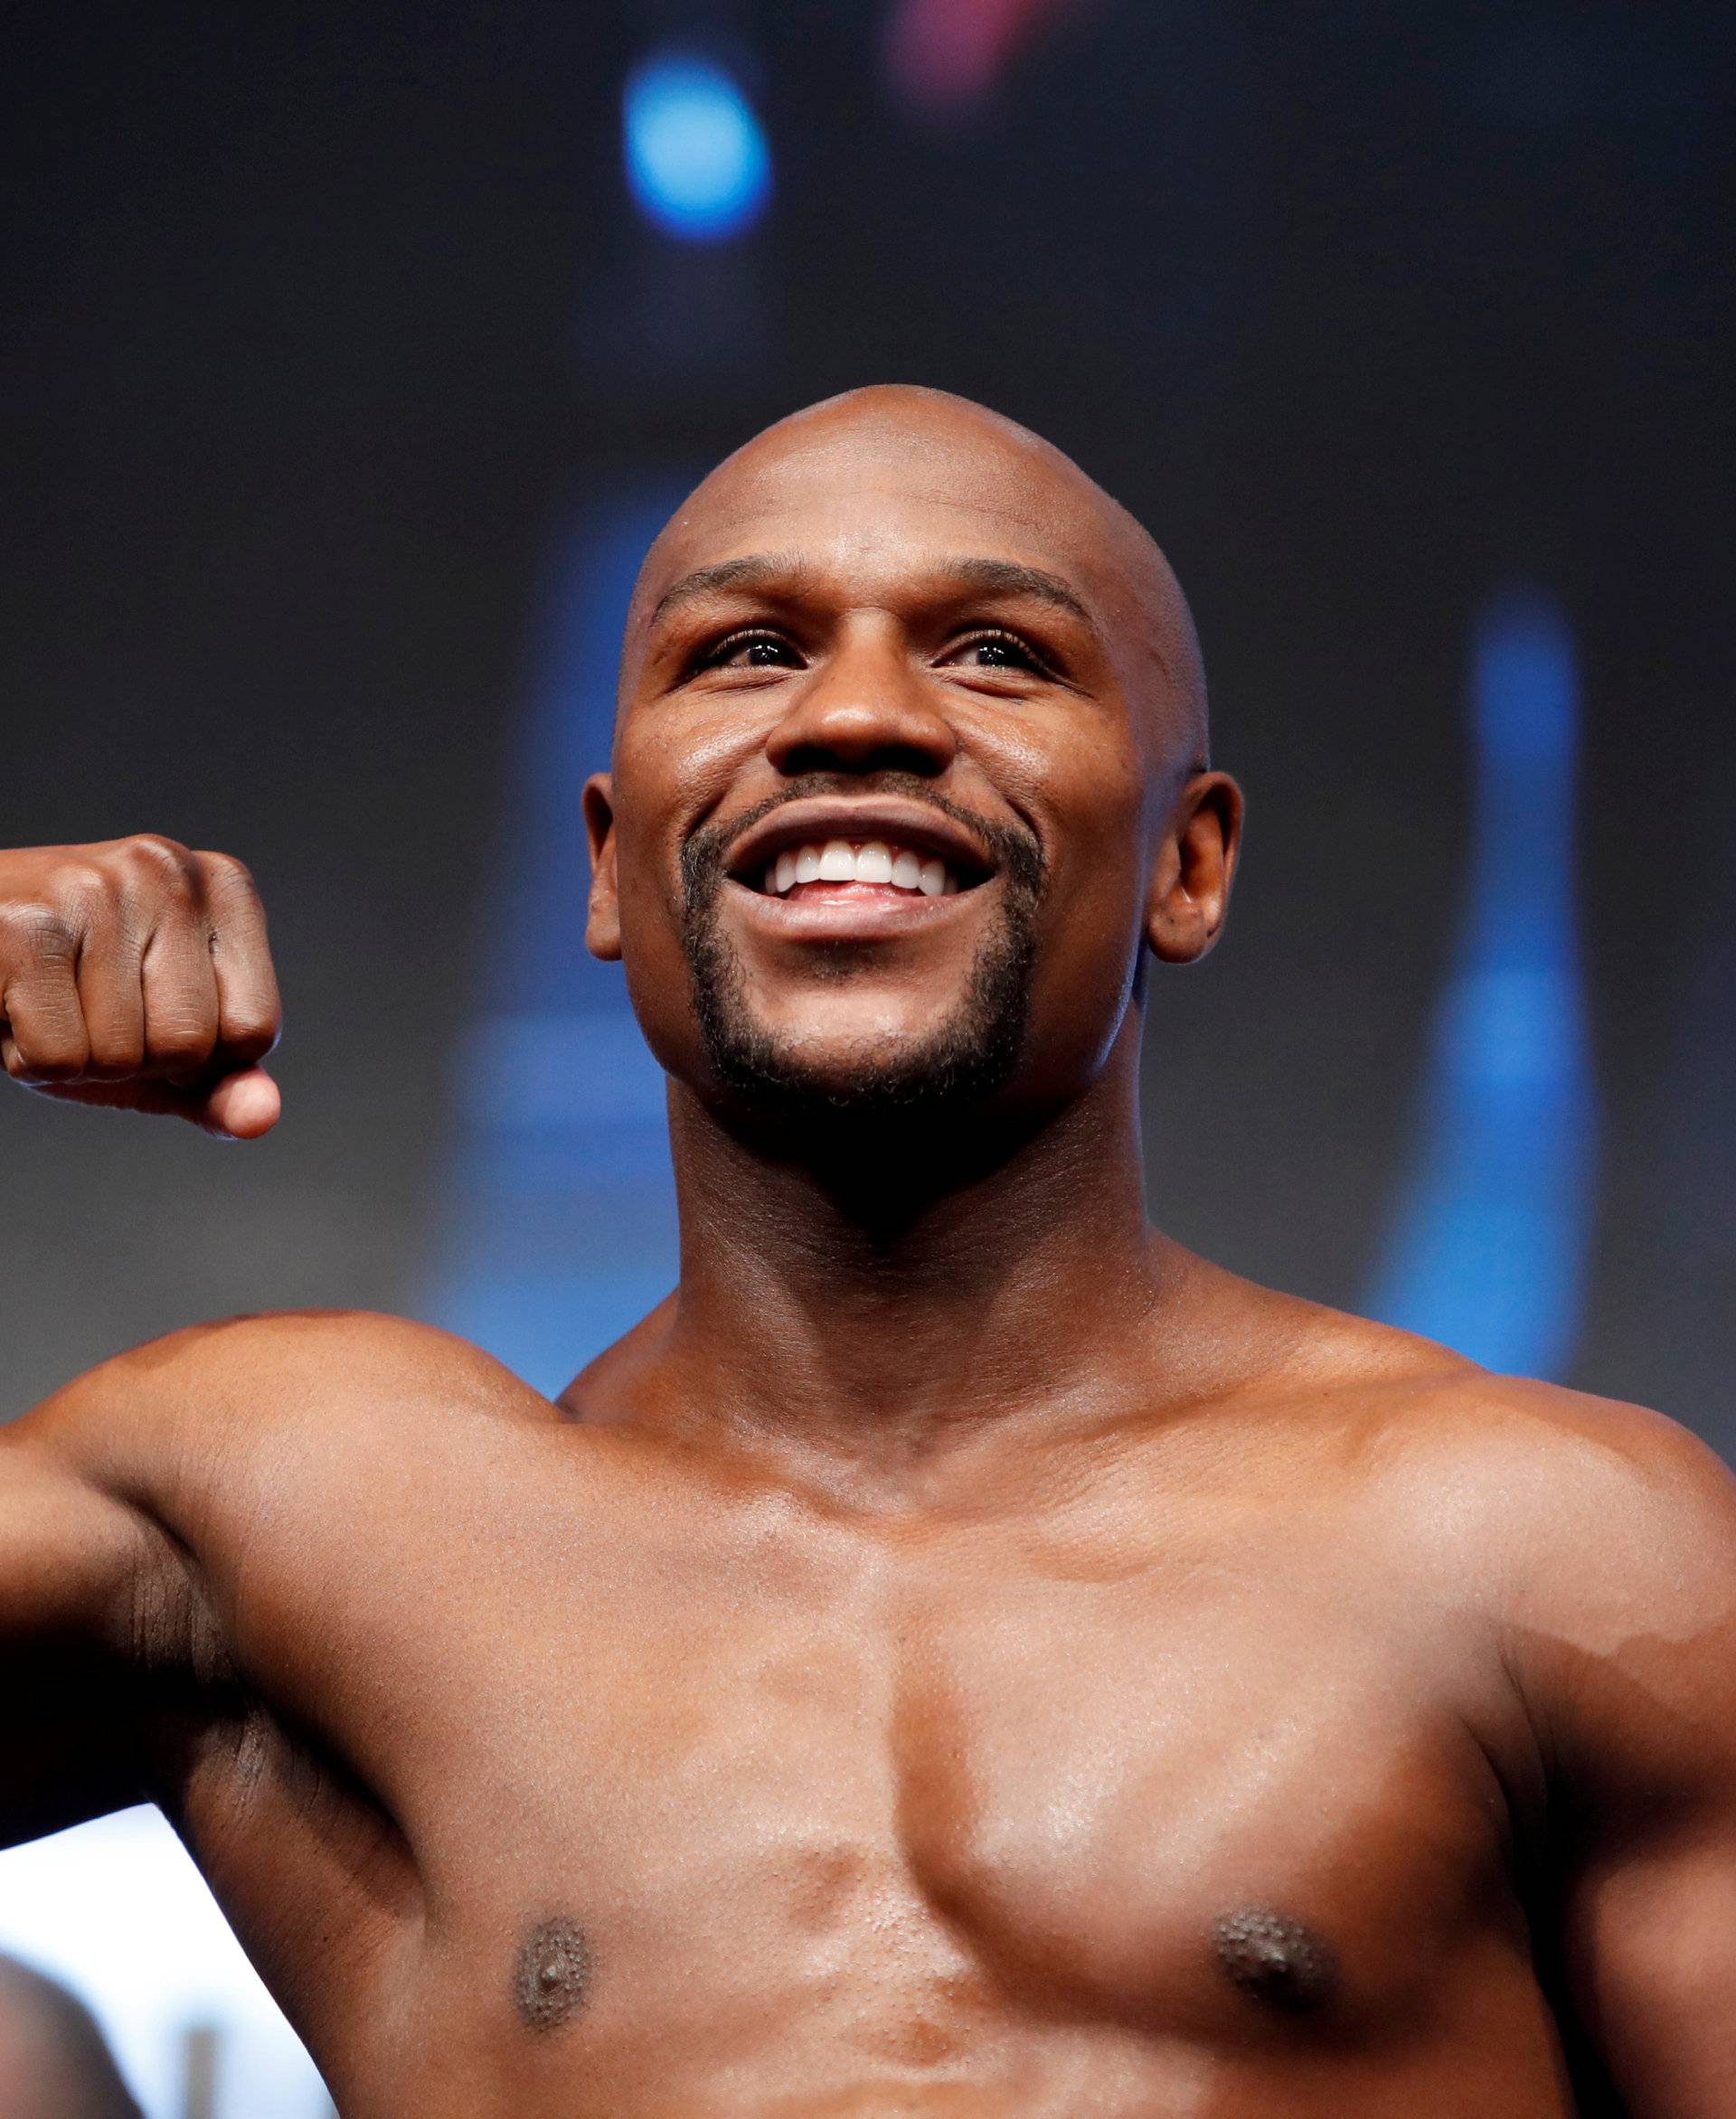 Undefeated boxer Floyd Mayweather Jr. of the U.S. poses on the scale during his official weigh-in at T-Mobile Arena in Las Vegas